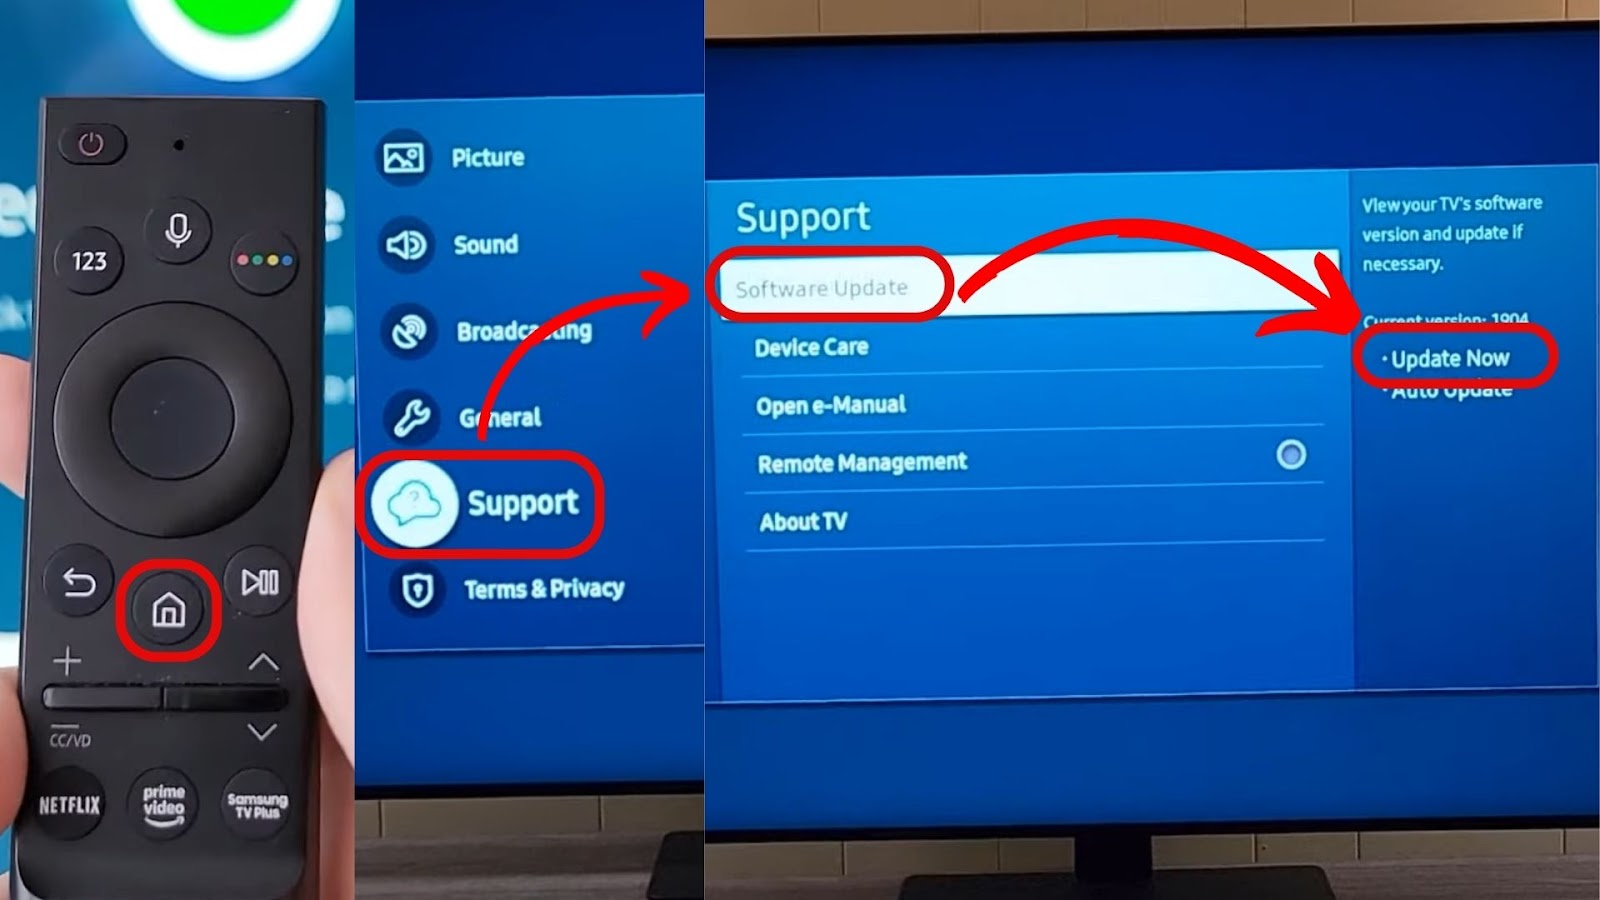 Update Now for Samsung TV HDMI